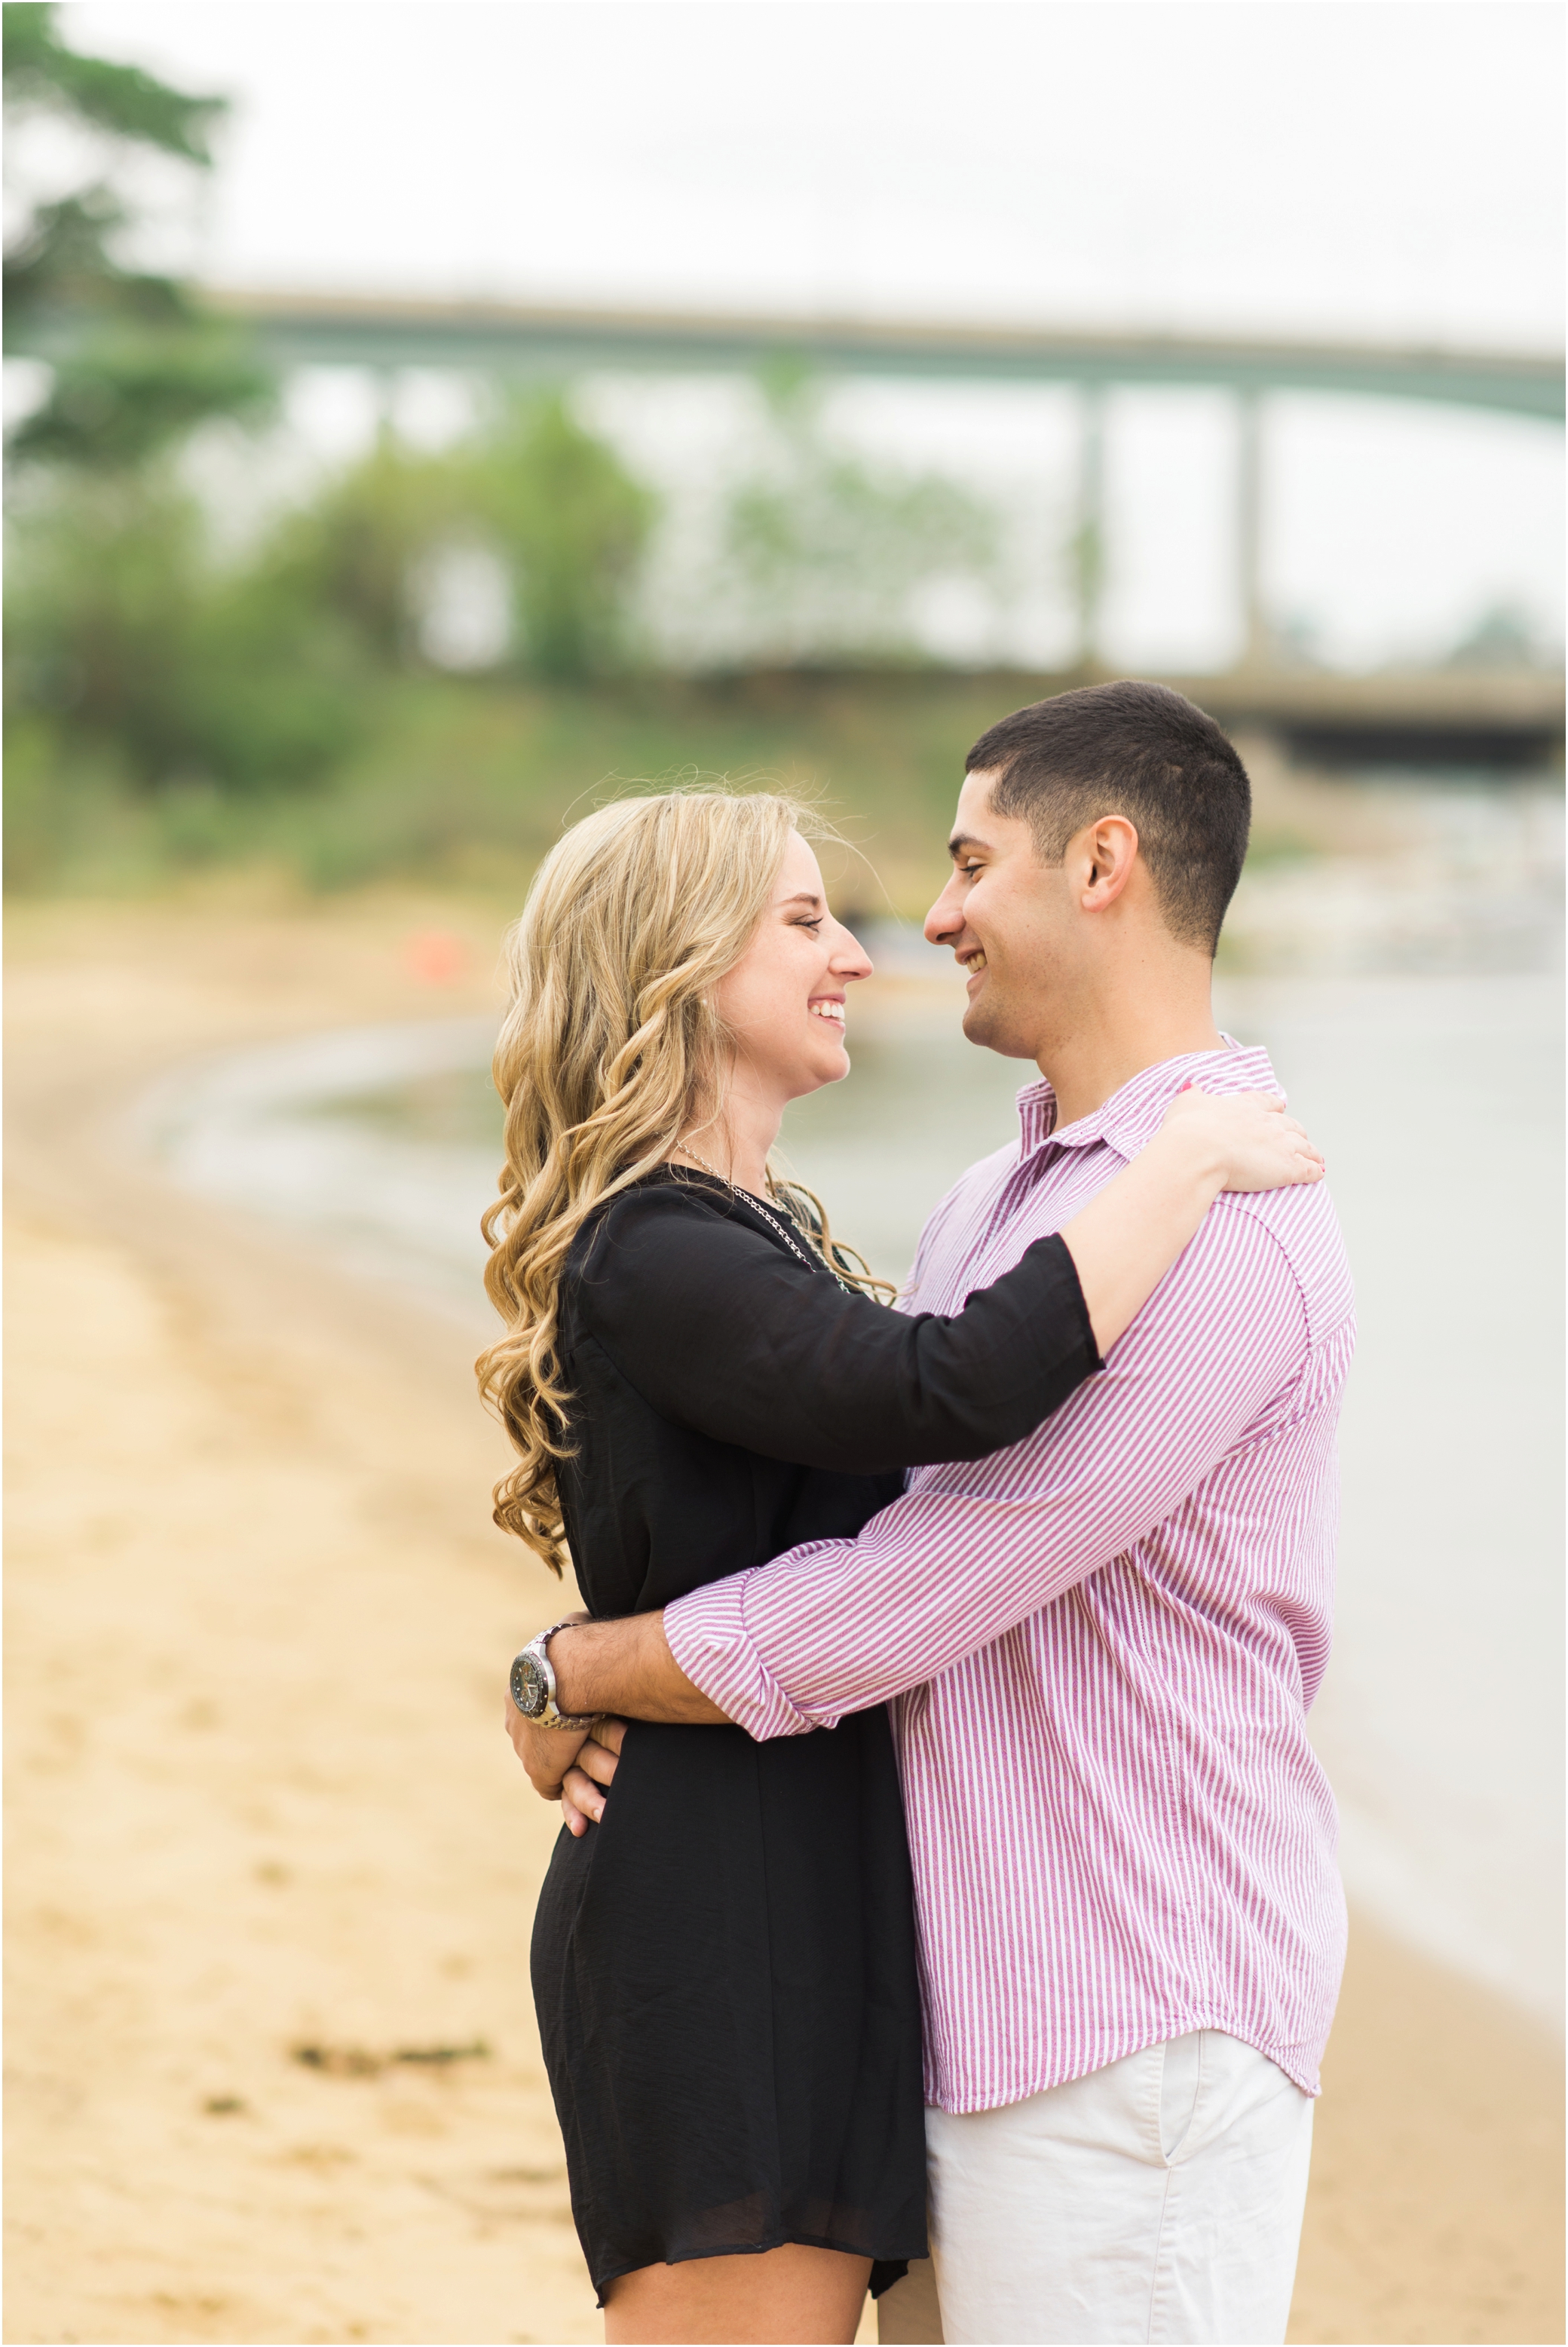 Jonas Green State park Engagement photos by Joy Michelle Photography